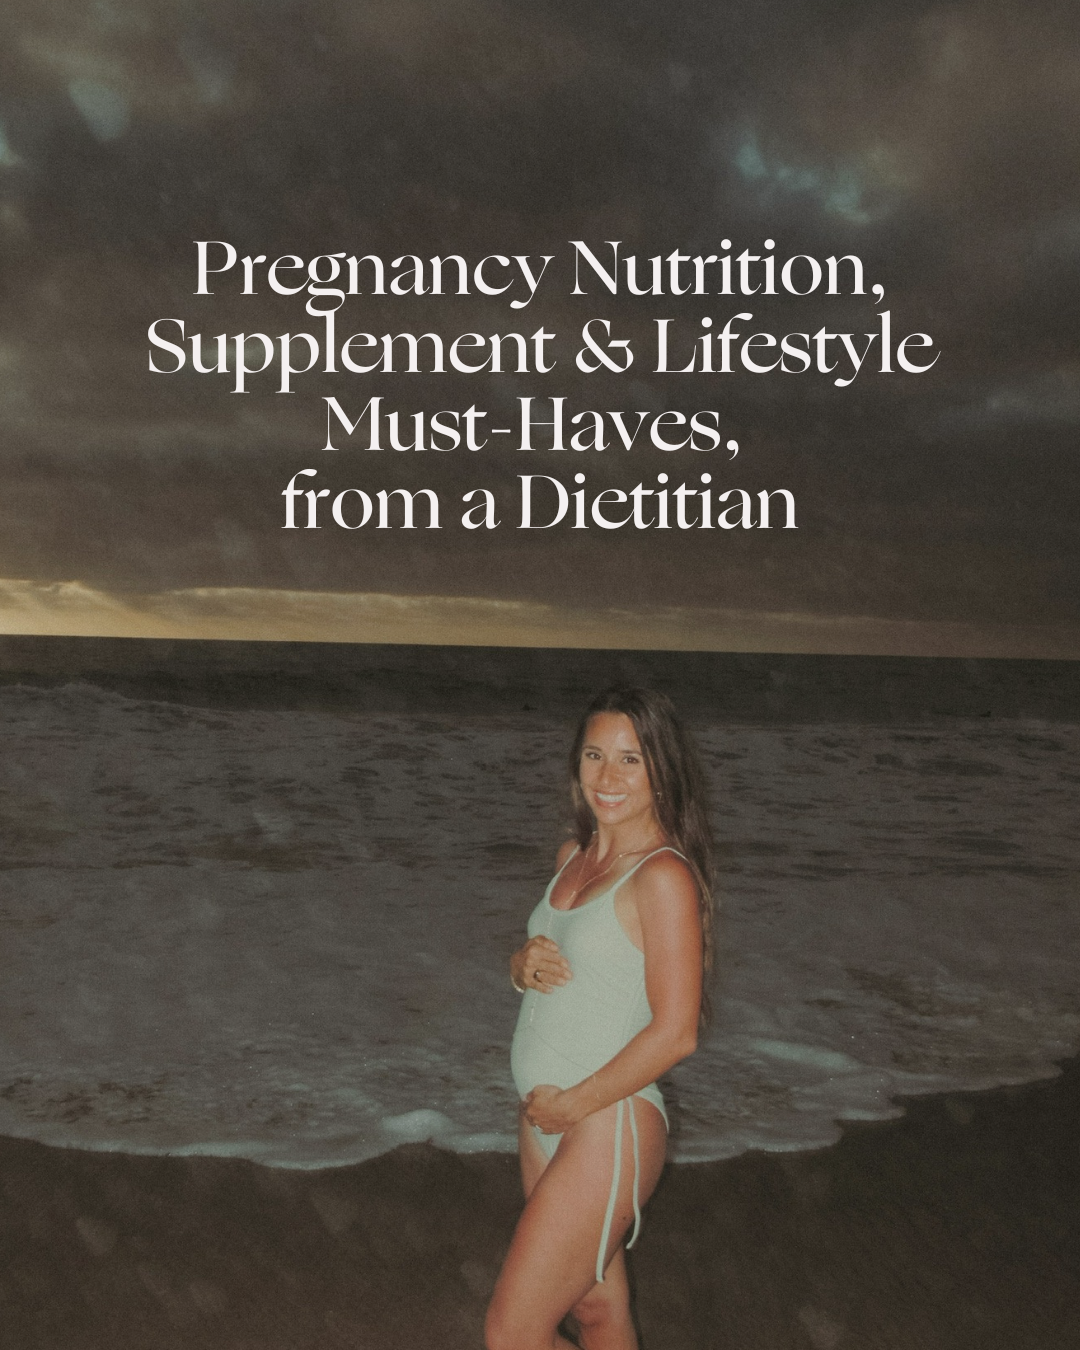 Pregnancy Nutrition, Supplement & Lifestyle Must-Haves, from a Dietitian